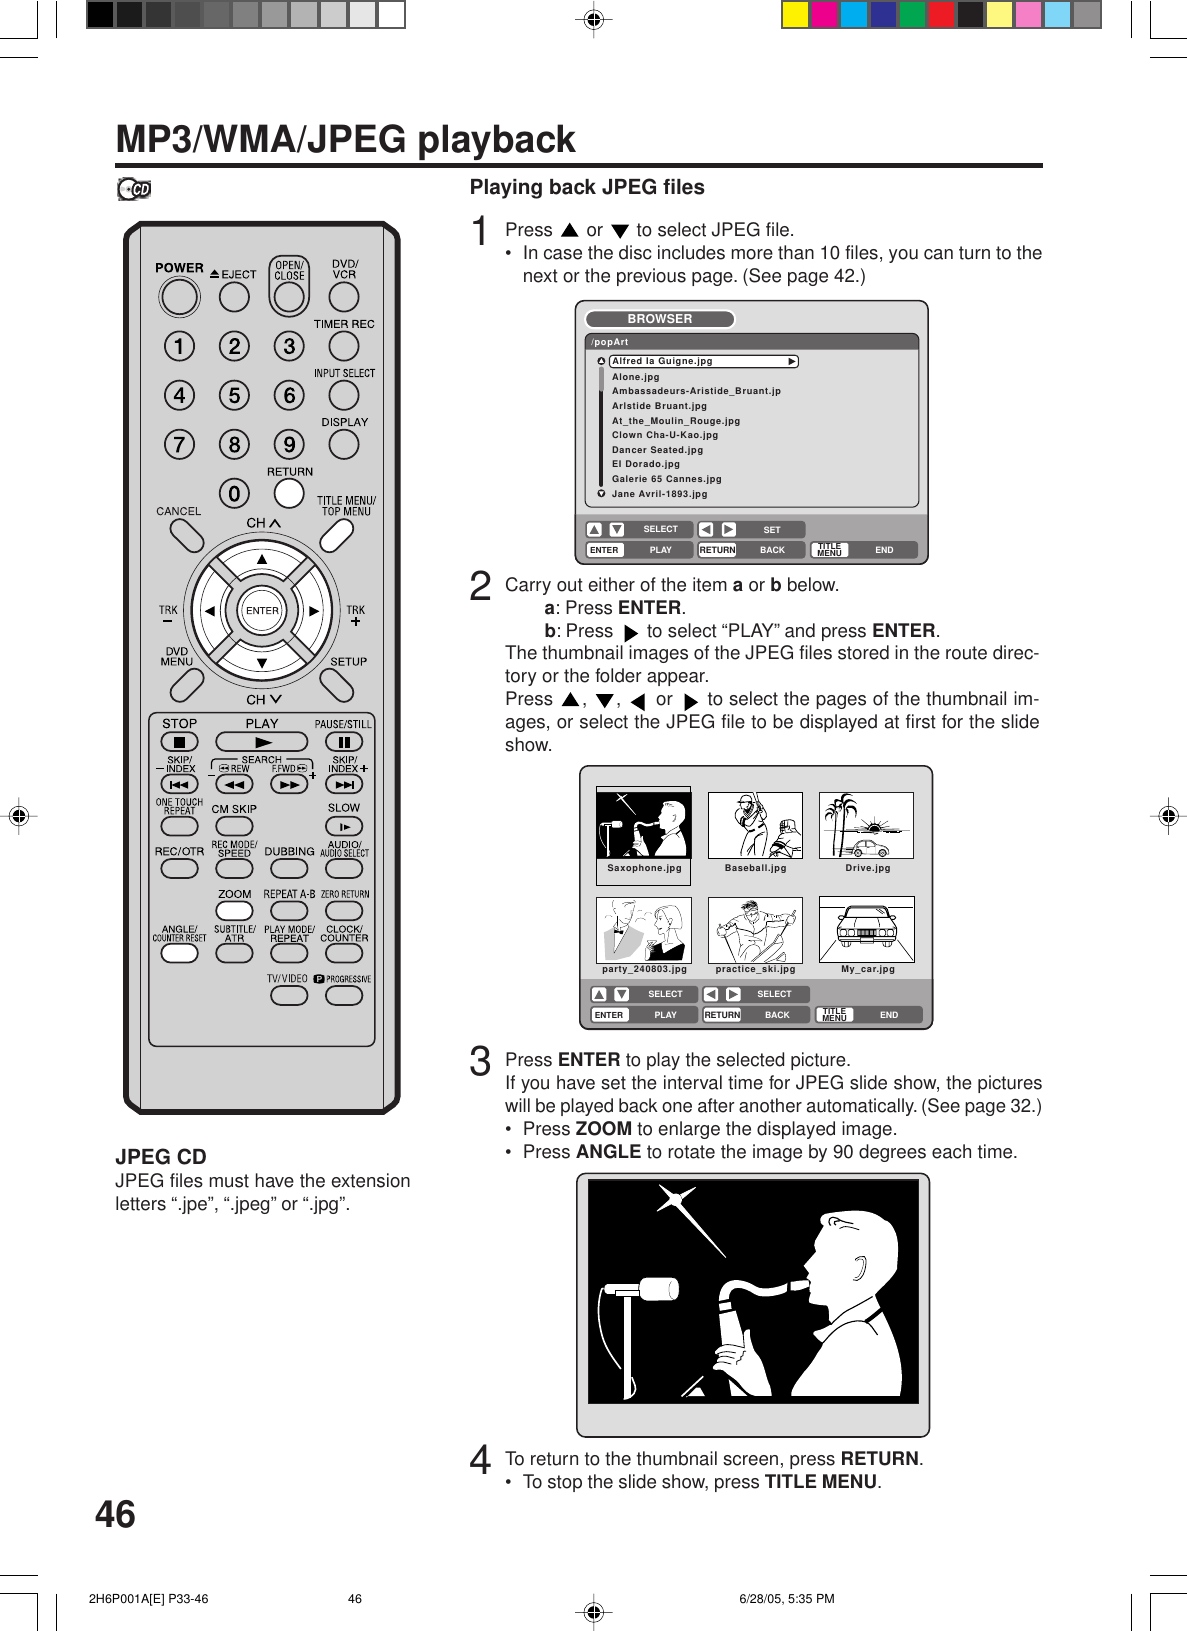 46MP3/WMA/JPEG playbackPlaying back JPEG files1Press   or   to select JPEG file.• In case the disc includes more than 10 files, you can turn to thenext or the previous page. (See page 42.)2Carry out either of the item a or b below.a: Press ENTER.b: Press   to select “PLAY” and press ENTER.The thumbnail images of the JPEG files stored in the route direc-tory or the folder appear.Press  ,  ,   or   to select the pages of the thumbnail im-ages, or select the JPEG file to be displayed at first for the slideshow.3Press ENTER to play the selected picture.If you have set the interval time for JPEG slide show, the pictureswill be played back one after another automatically. (See page 32.)• Press ZOOM to enlarge the displayed image.• Press ANGLE to rotate the image by 90 degrees each time.JPEG CDJPEG files must have the extensionletters “.jpe”, “.jpeg” or “.jpg”.4To return to the thumbnail screen, press RETURN.• To stop the slide show, press TITLE MENU.Alone.jpgAmbassadeurs-Aristide_Bruant.jpArlstide Bruant.jpgAt_the_Moulin_Rouge.jpgClown Cha-U-Kao.jpgDancer Seated.jpgEI Dorado.jpgGalerie 65 Cannes.jpgJane Avril-1893.jpgAlfred Ia Guigne.jpg/popArtBROWSERENTERRETURNPLAY BACKSETENDSELECTTITLEMENUSaxophone.jpg Baseball.jpg Drive.jpgparty_240803.jpg practice_ski.jpg My_car.jpgENTERRETURNPLAY BACK ENDSELECT SELECTTITLEMENU 2H6P001A[E] P33-46 6/28/05, 5:35 PM46